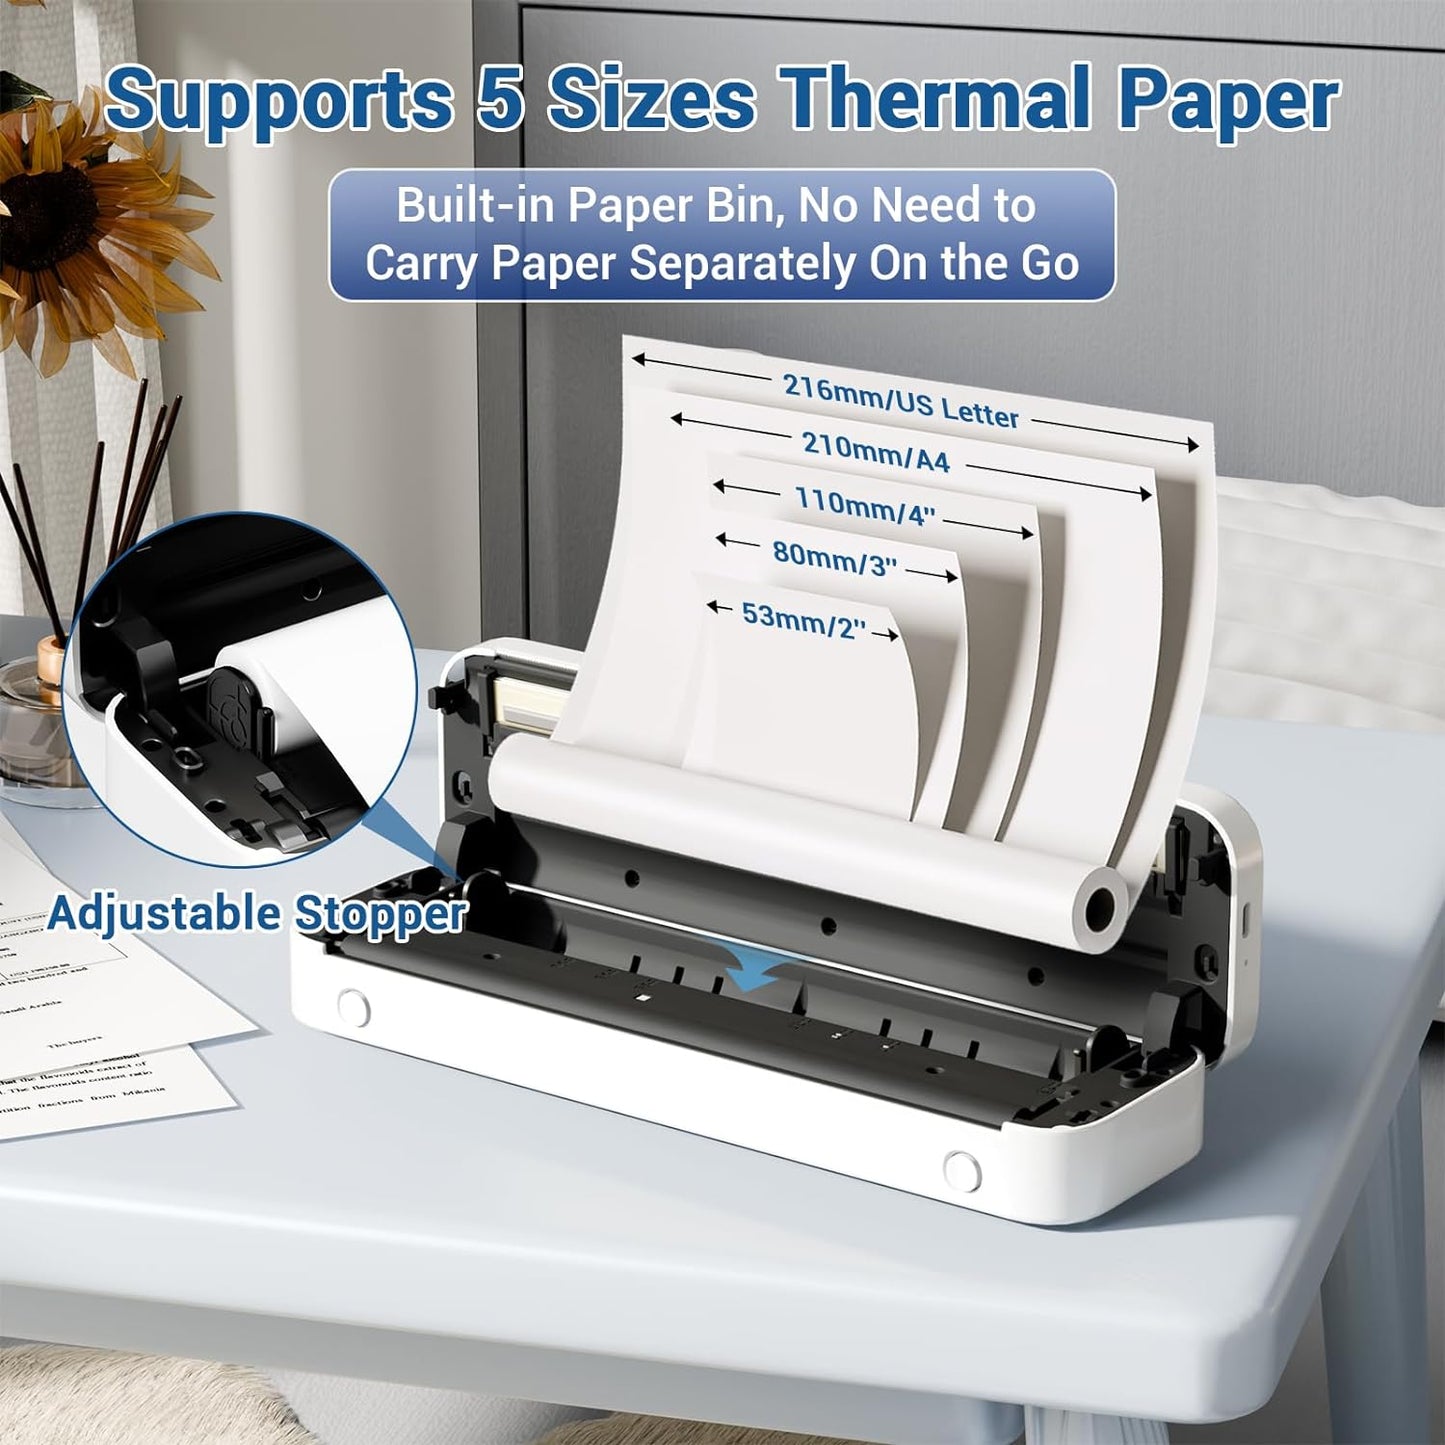 Portable Inkless Bluetooth Wireless Printer for Travel, M835 Thermal Printer